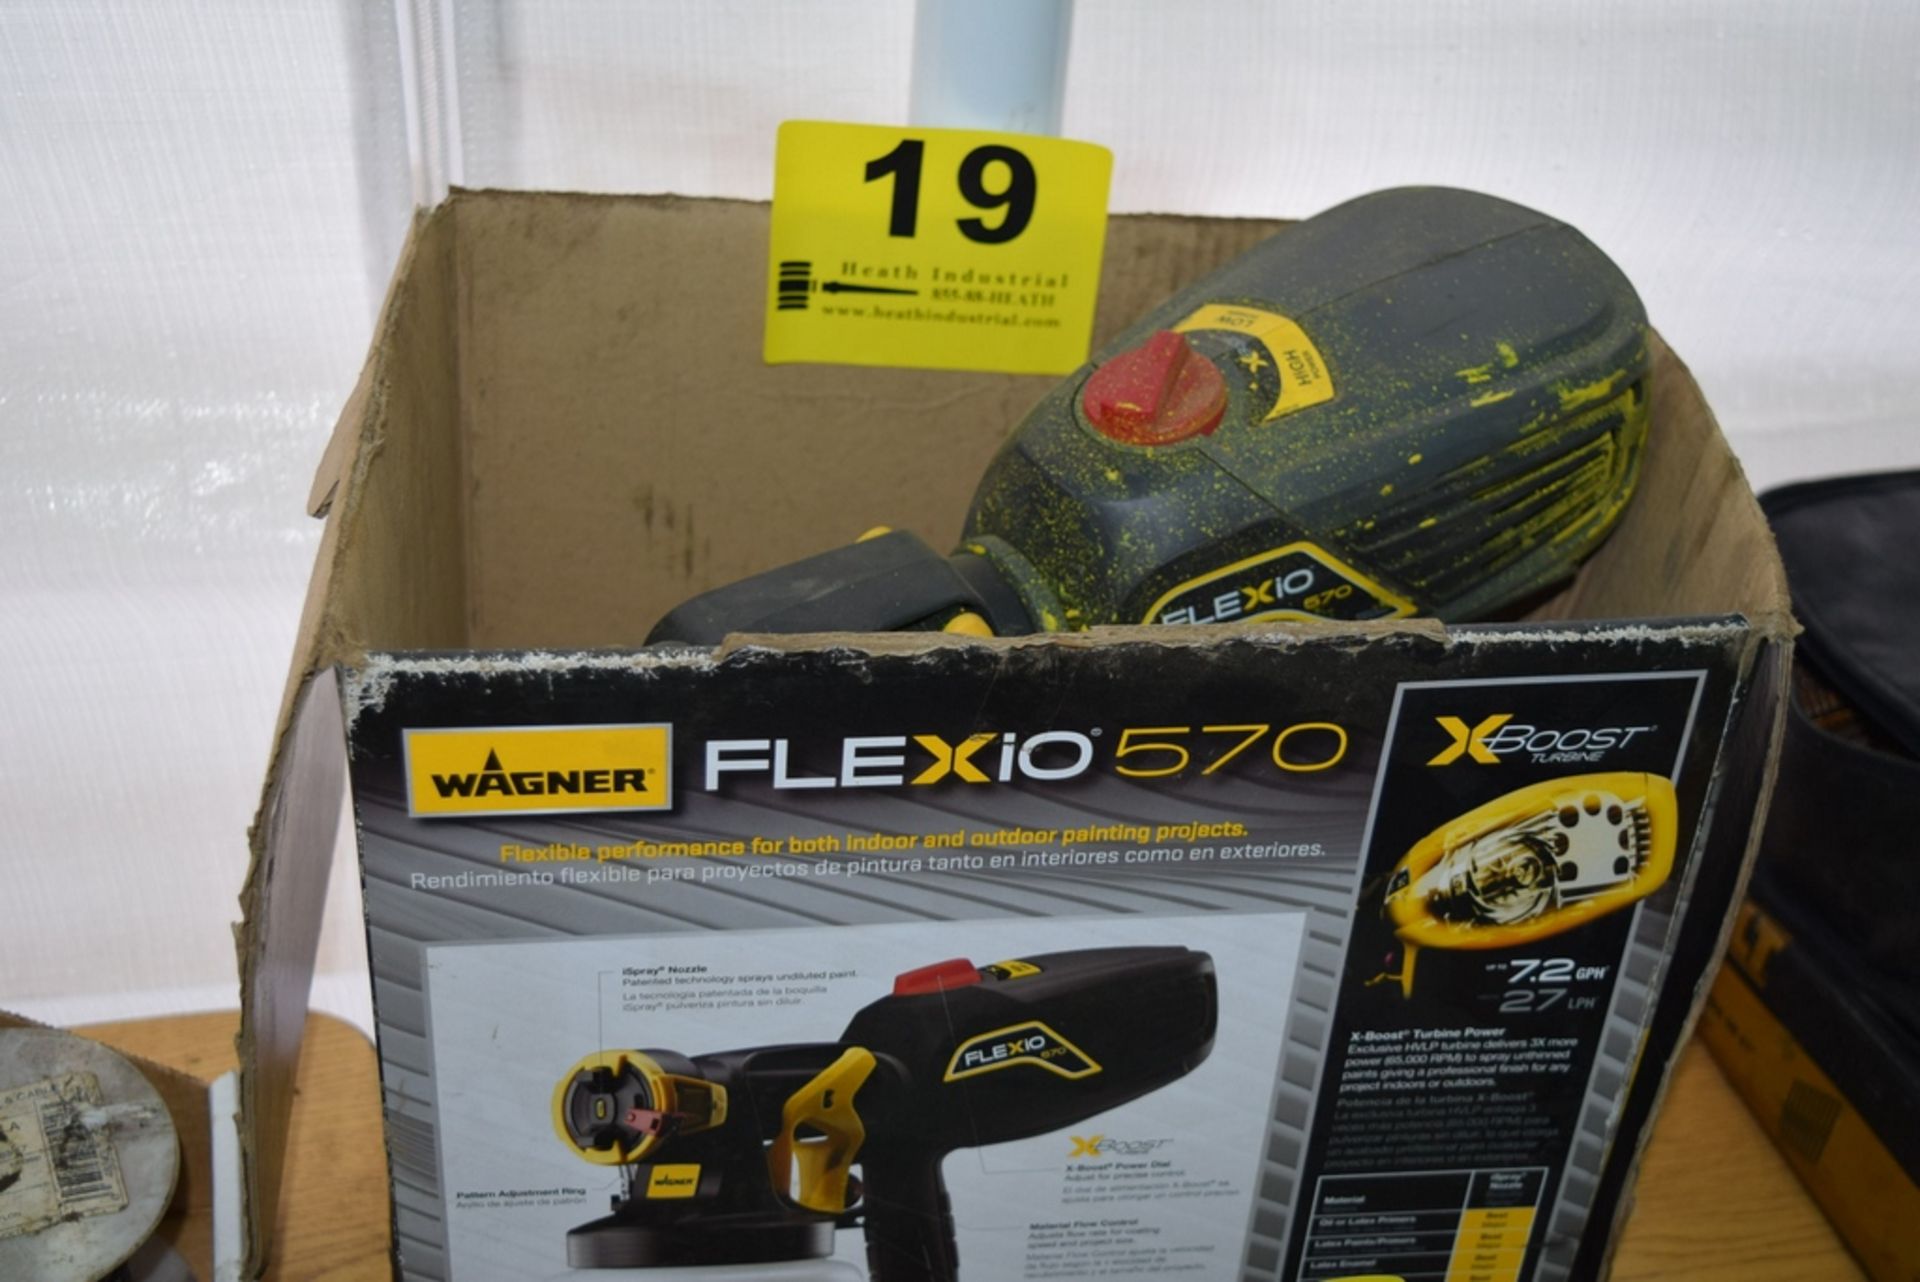 WAGNER FLEXIO 570 7.2 GPH ELECTRIC PAINT SPRAY SYSTEM IN BOX